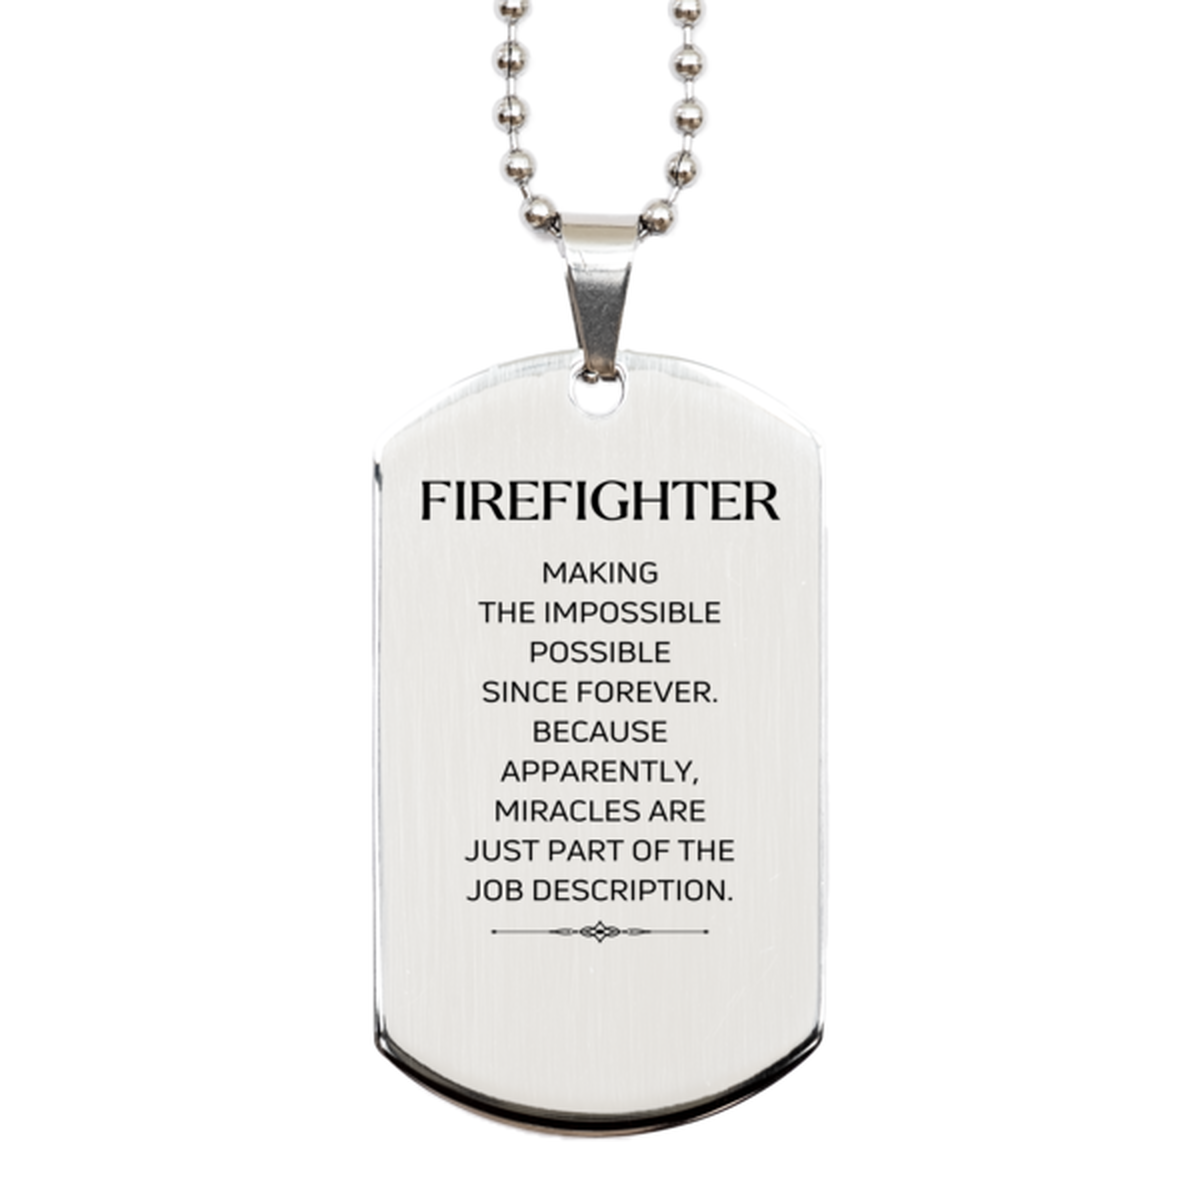 Funny Firefighter Gifts, Miracles are just part of the job description, Inspirational Birthday Silver Dog Tag For Firefighter, Men, Women, Coworkers, Friends, Boss